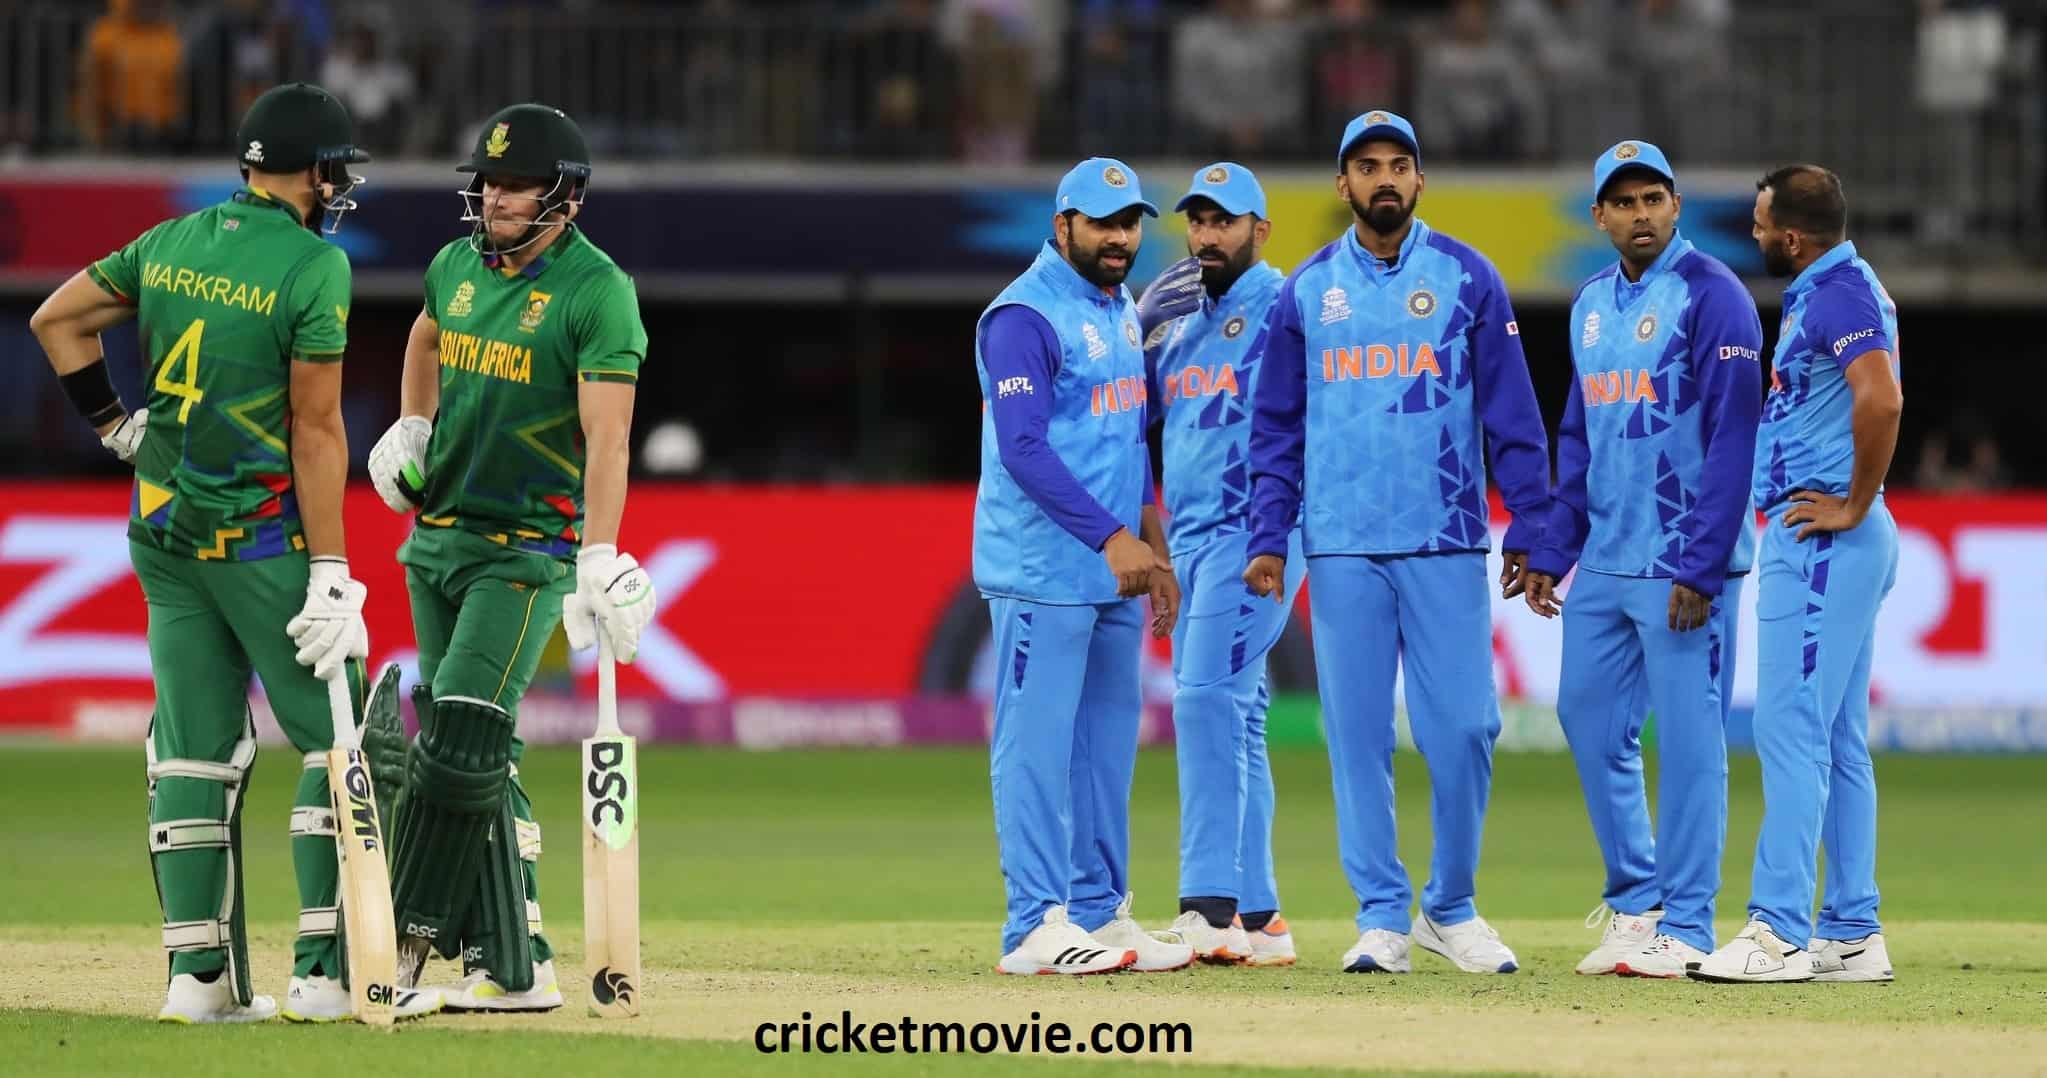 South Africa beat Team India by 5 wickets-cricketmovie.com